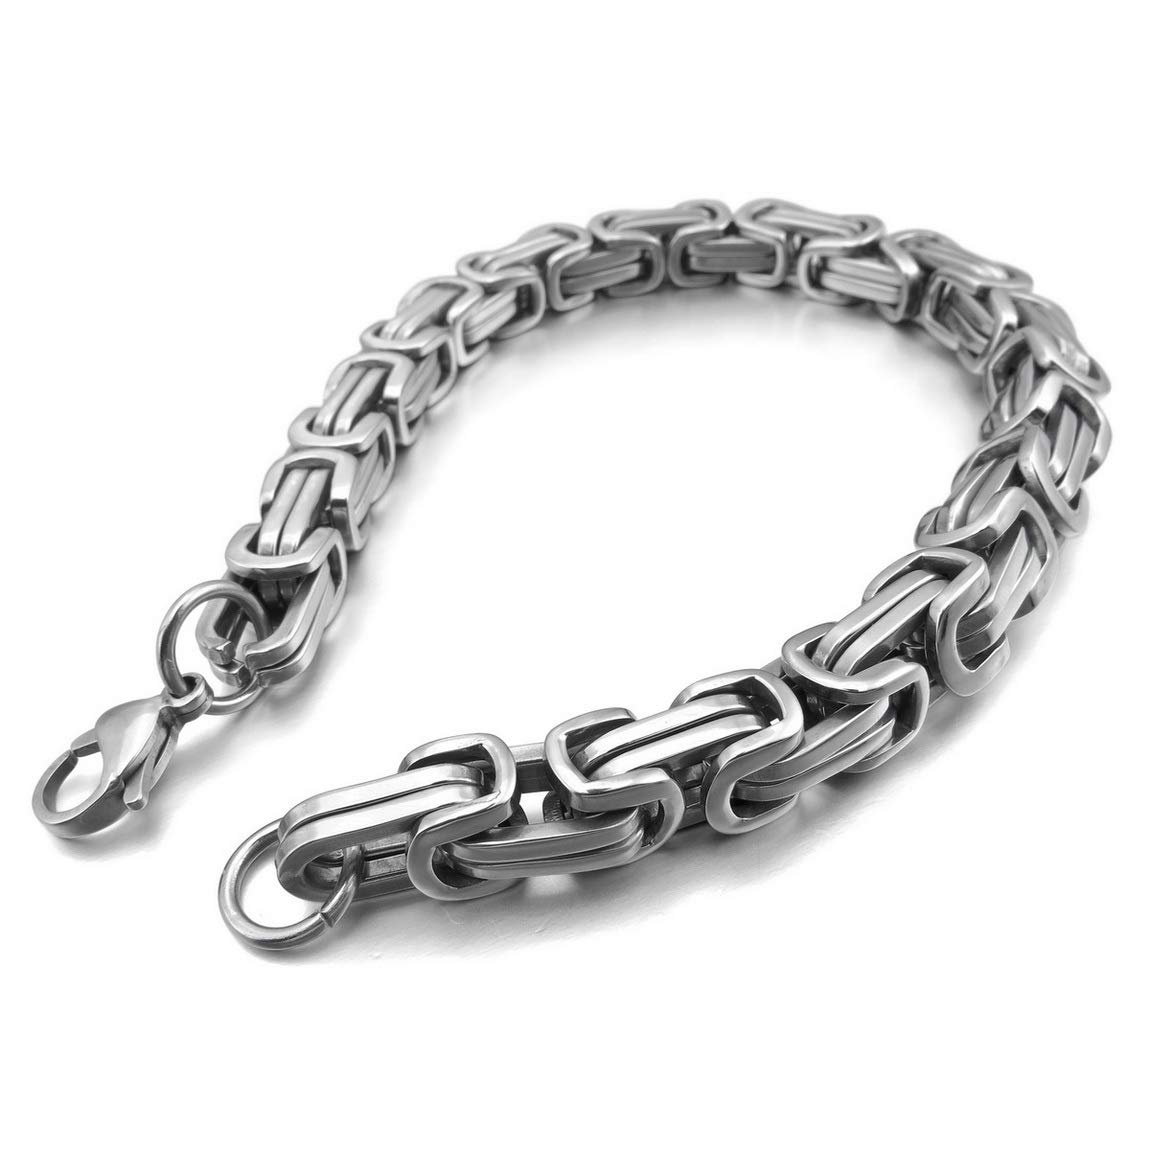 INBLUE 8mm Wide 316L Stainless Steel Bracelet Byzantine Link Chain Bracelet for Men Women Boys Water Resistance (5 Colors - Silver Black Gold Silver and Silver and Gold, 4 Lengths - 7.5